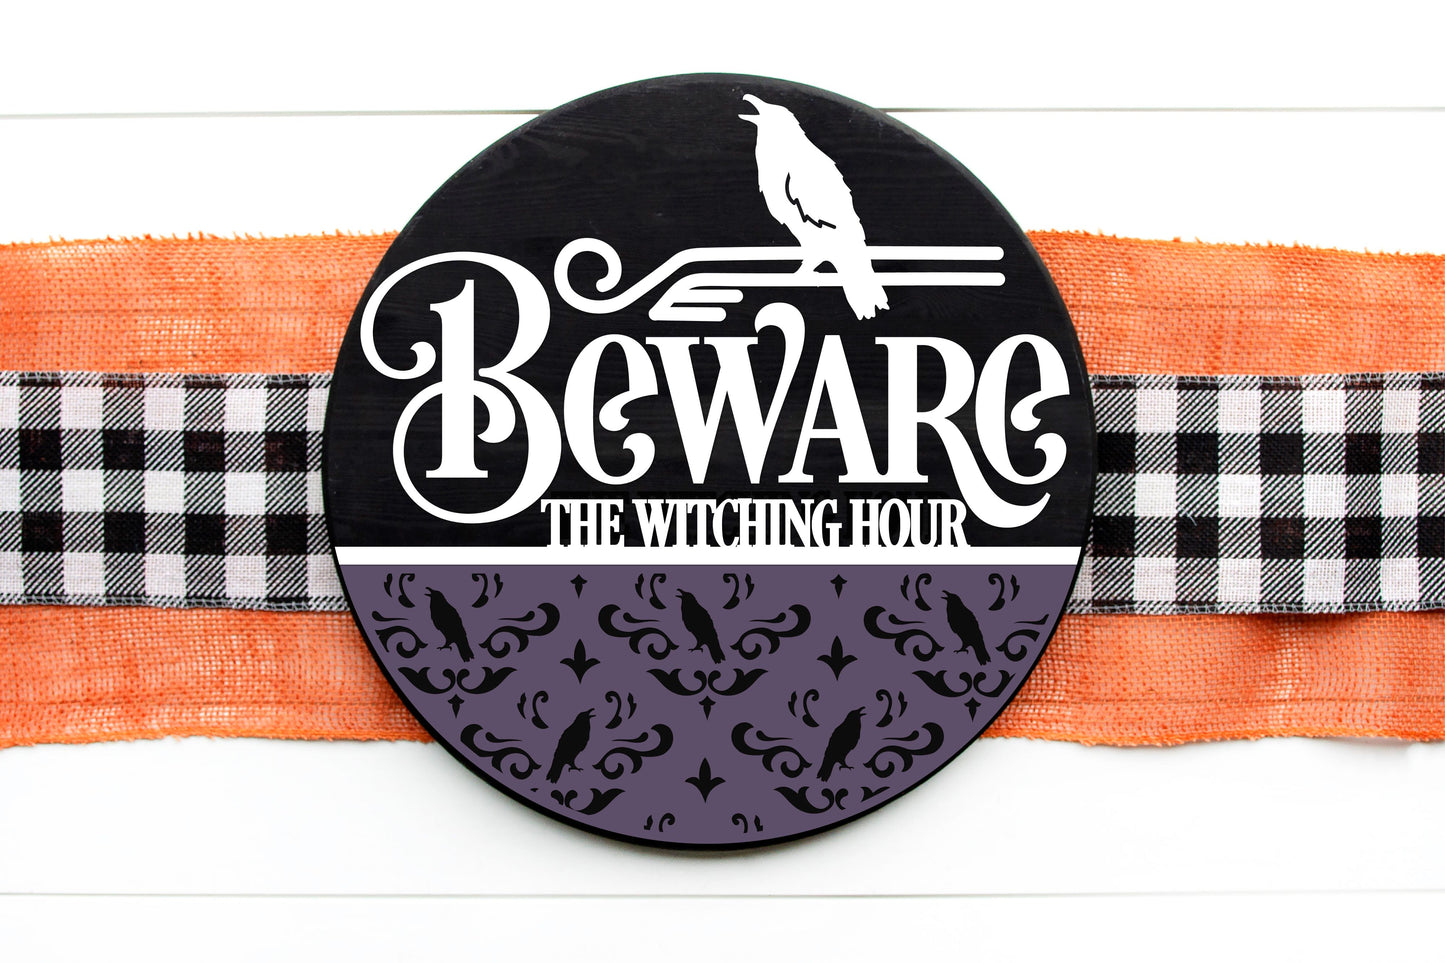 The witching hour Halloween sign